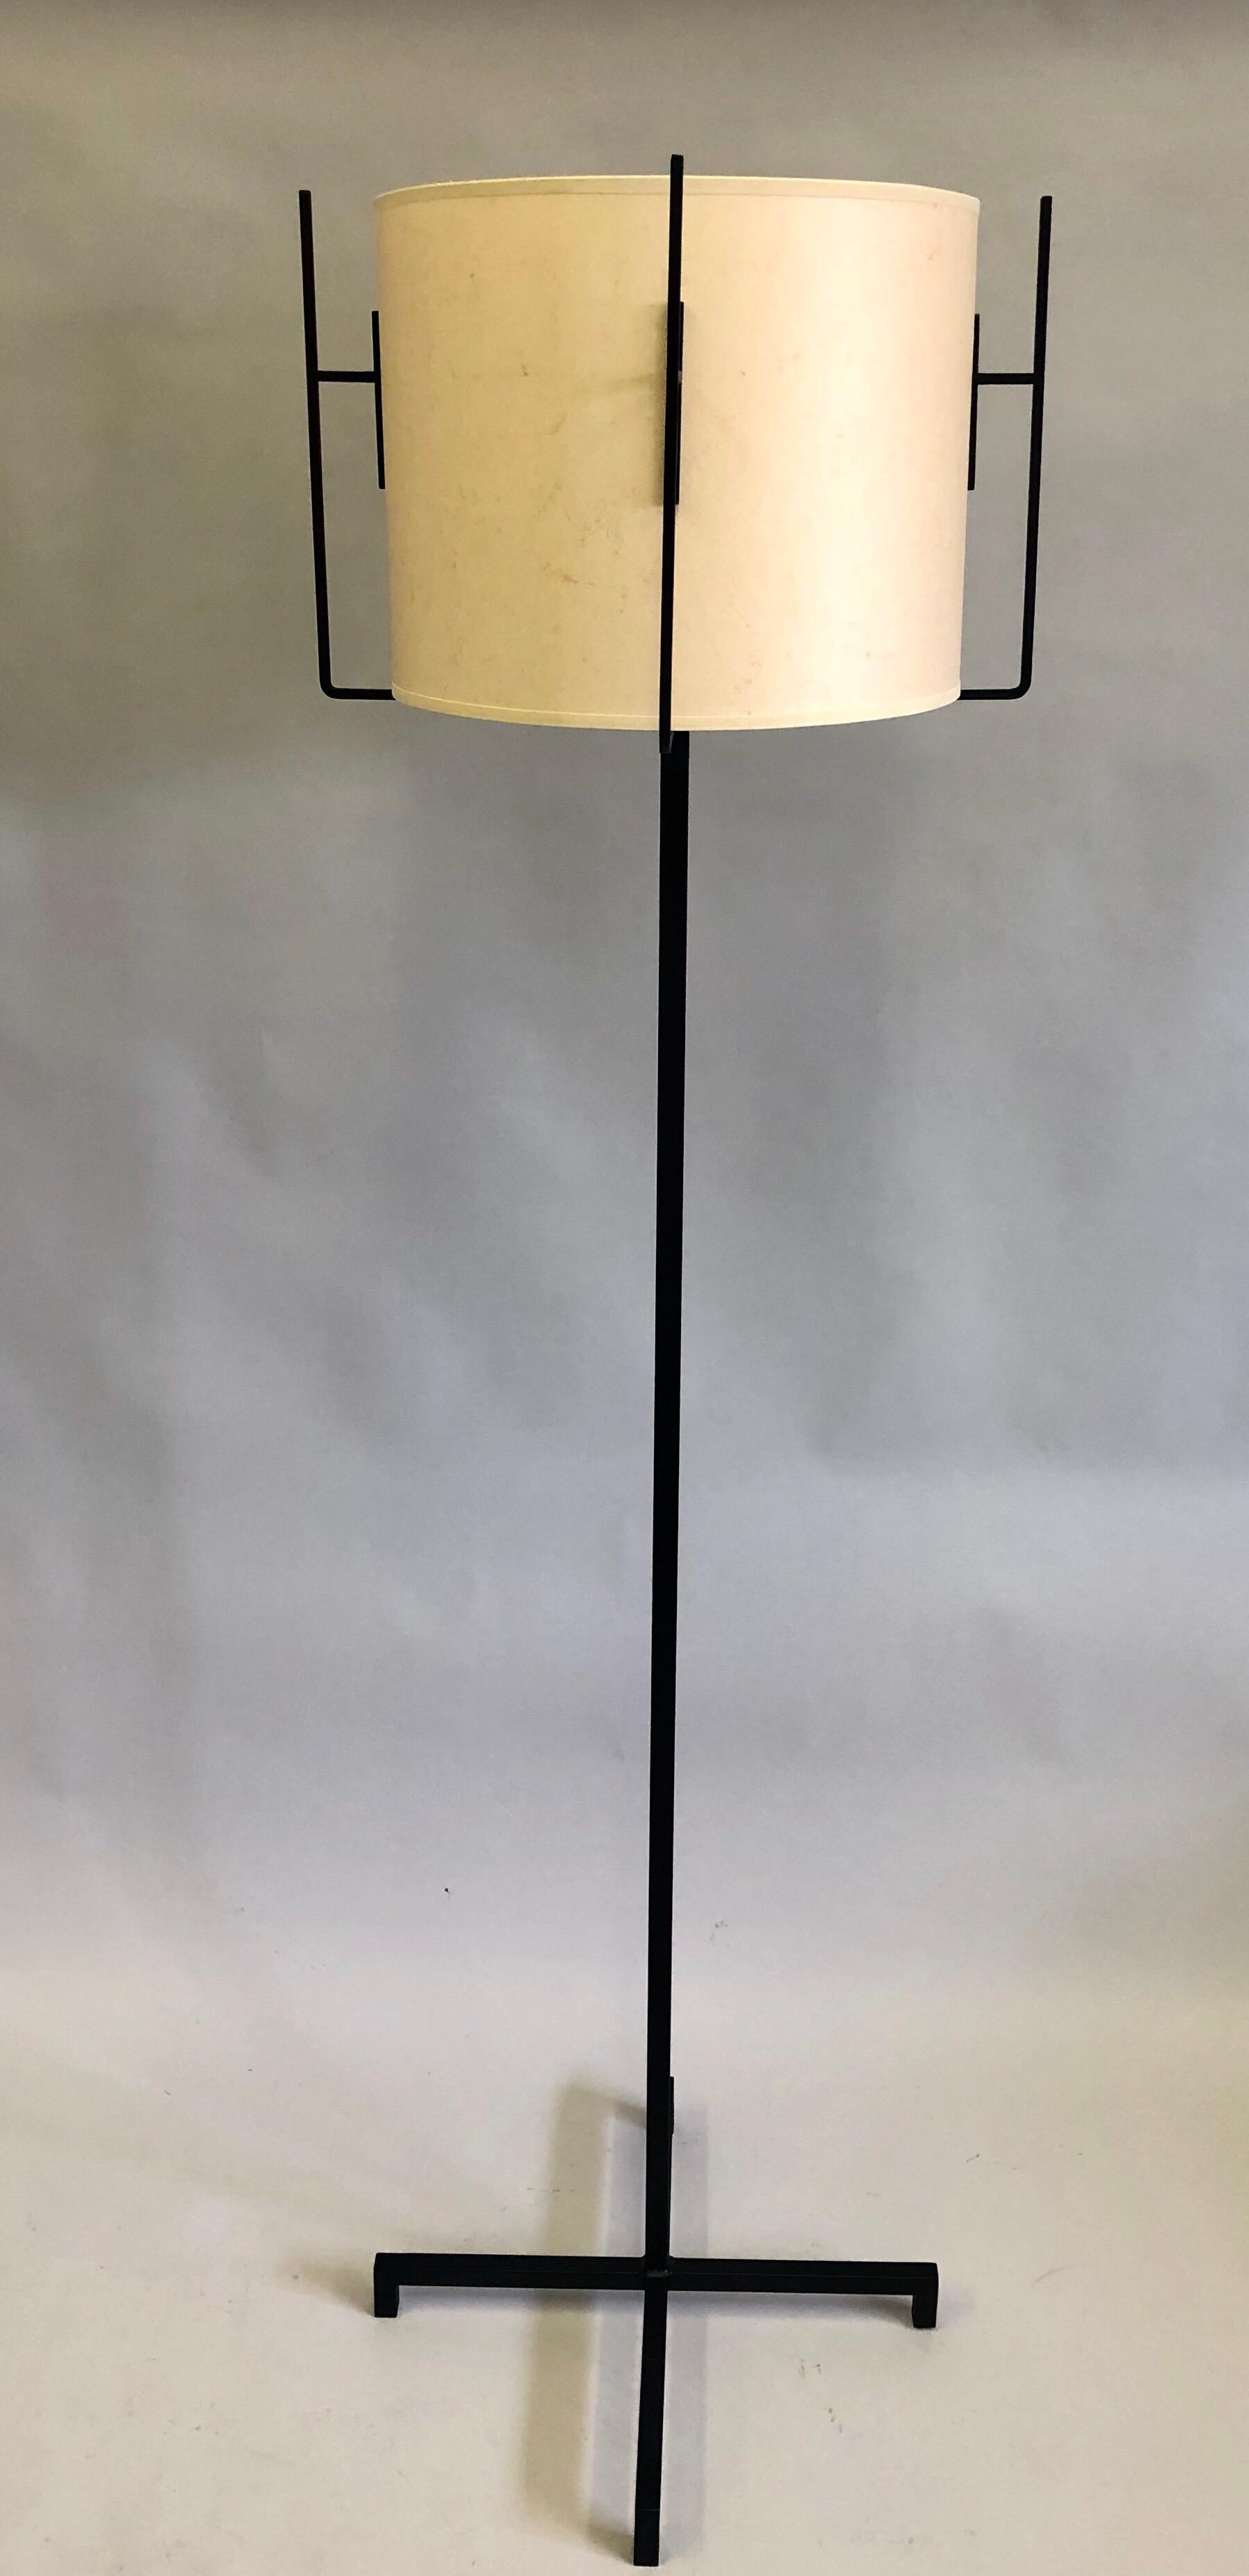 20th Century Pair of French Mid-Century Modern Iron & Parchment Floor Lamps by Jacques Adnet For Sale